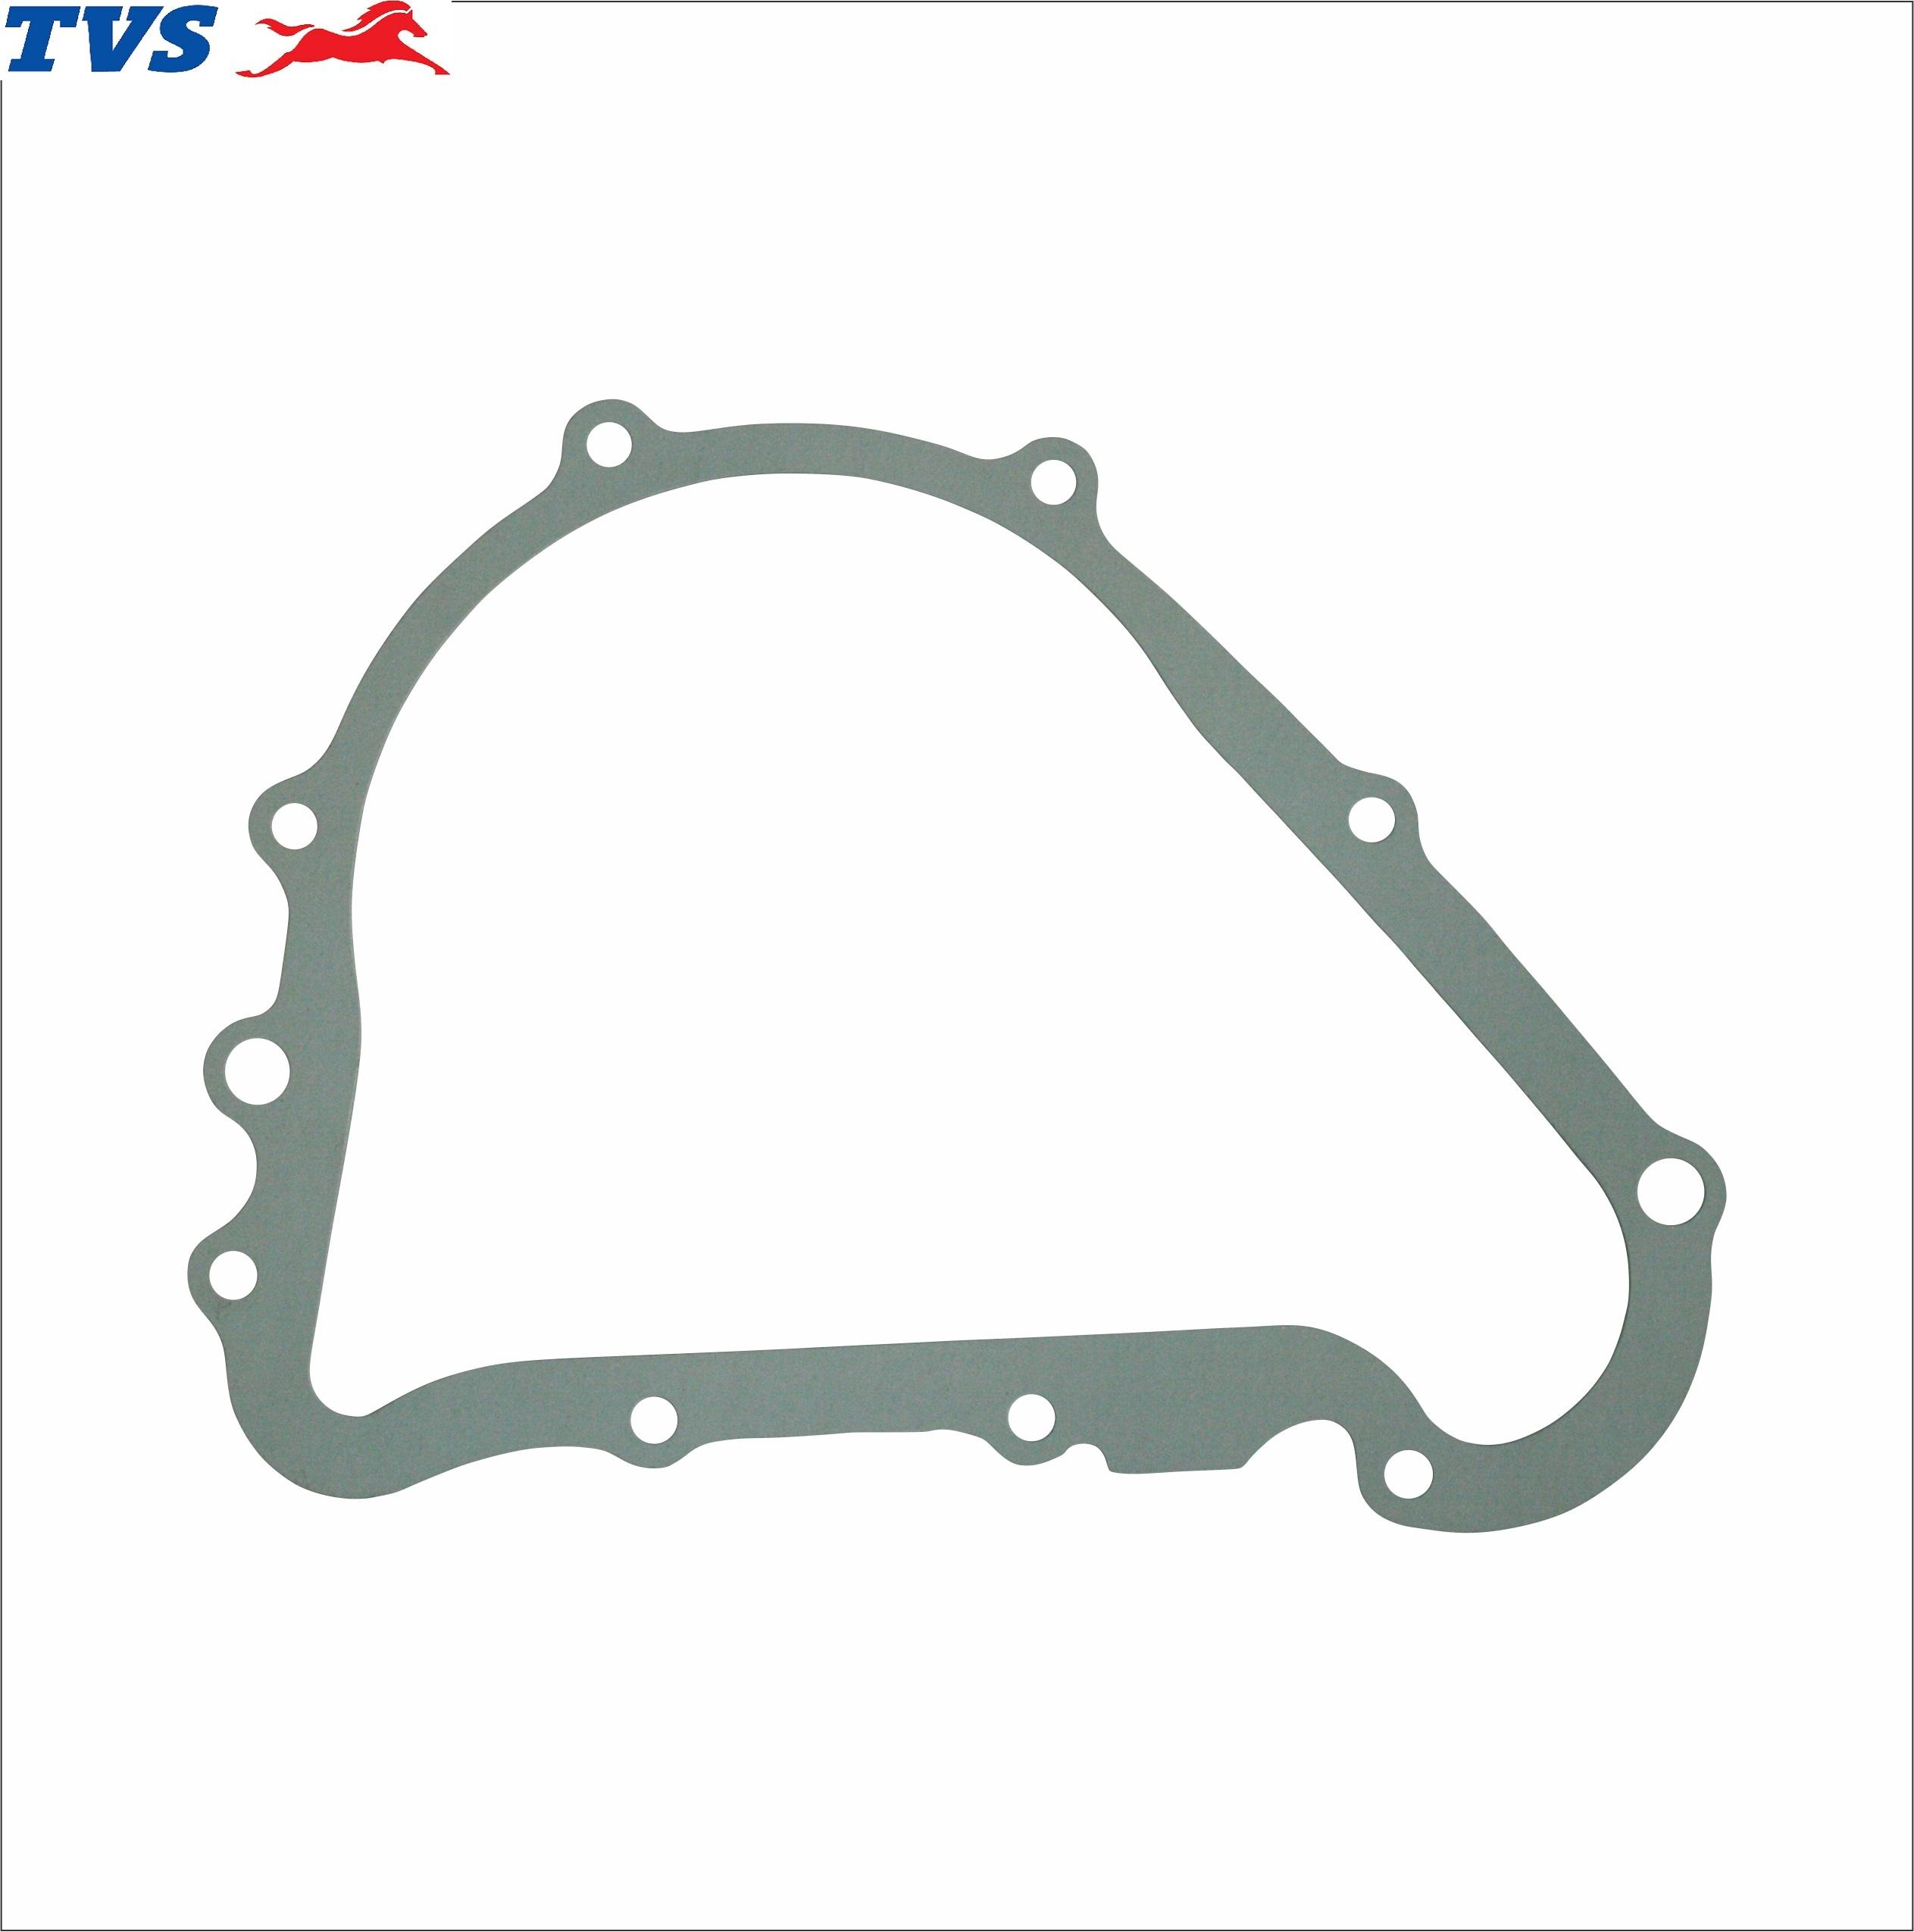 tvs apache 150 spare parts online shopping